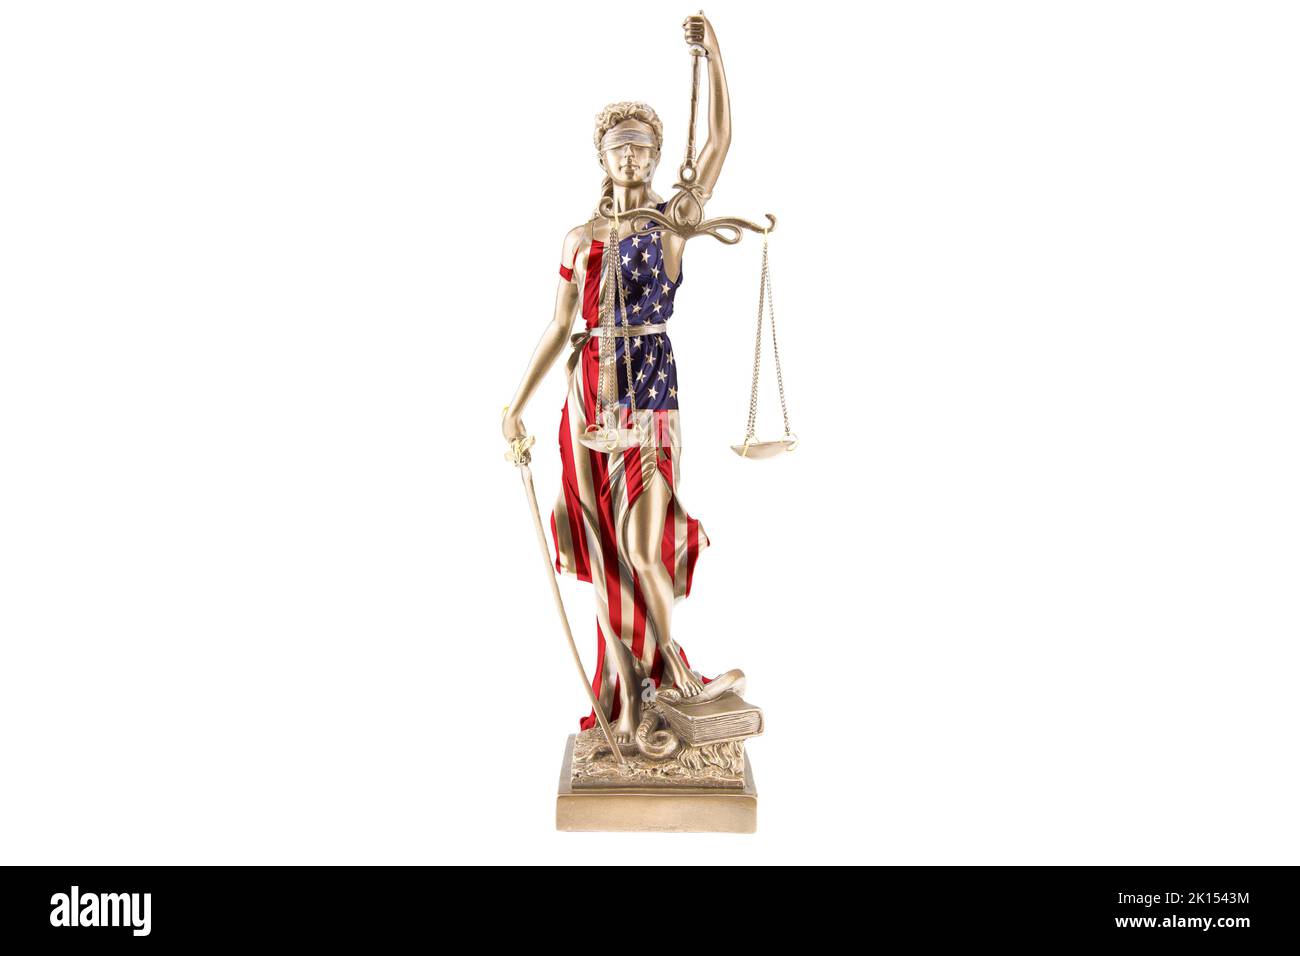 A statue of Justice wears the national flag of the USA as a dress. She steps on a snake and holds a scale in her hand. White background. Stock Photo